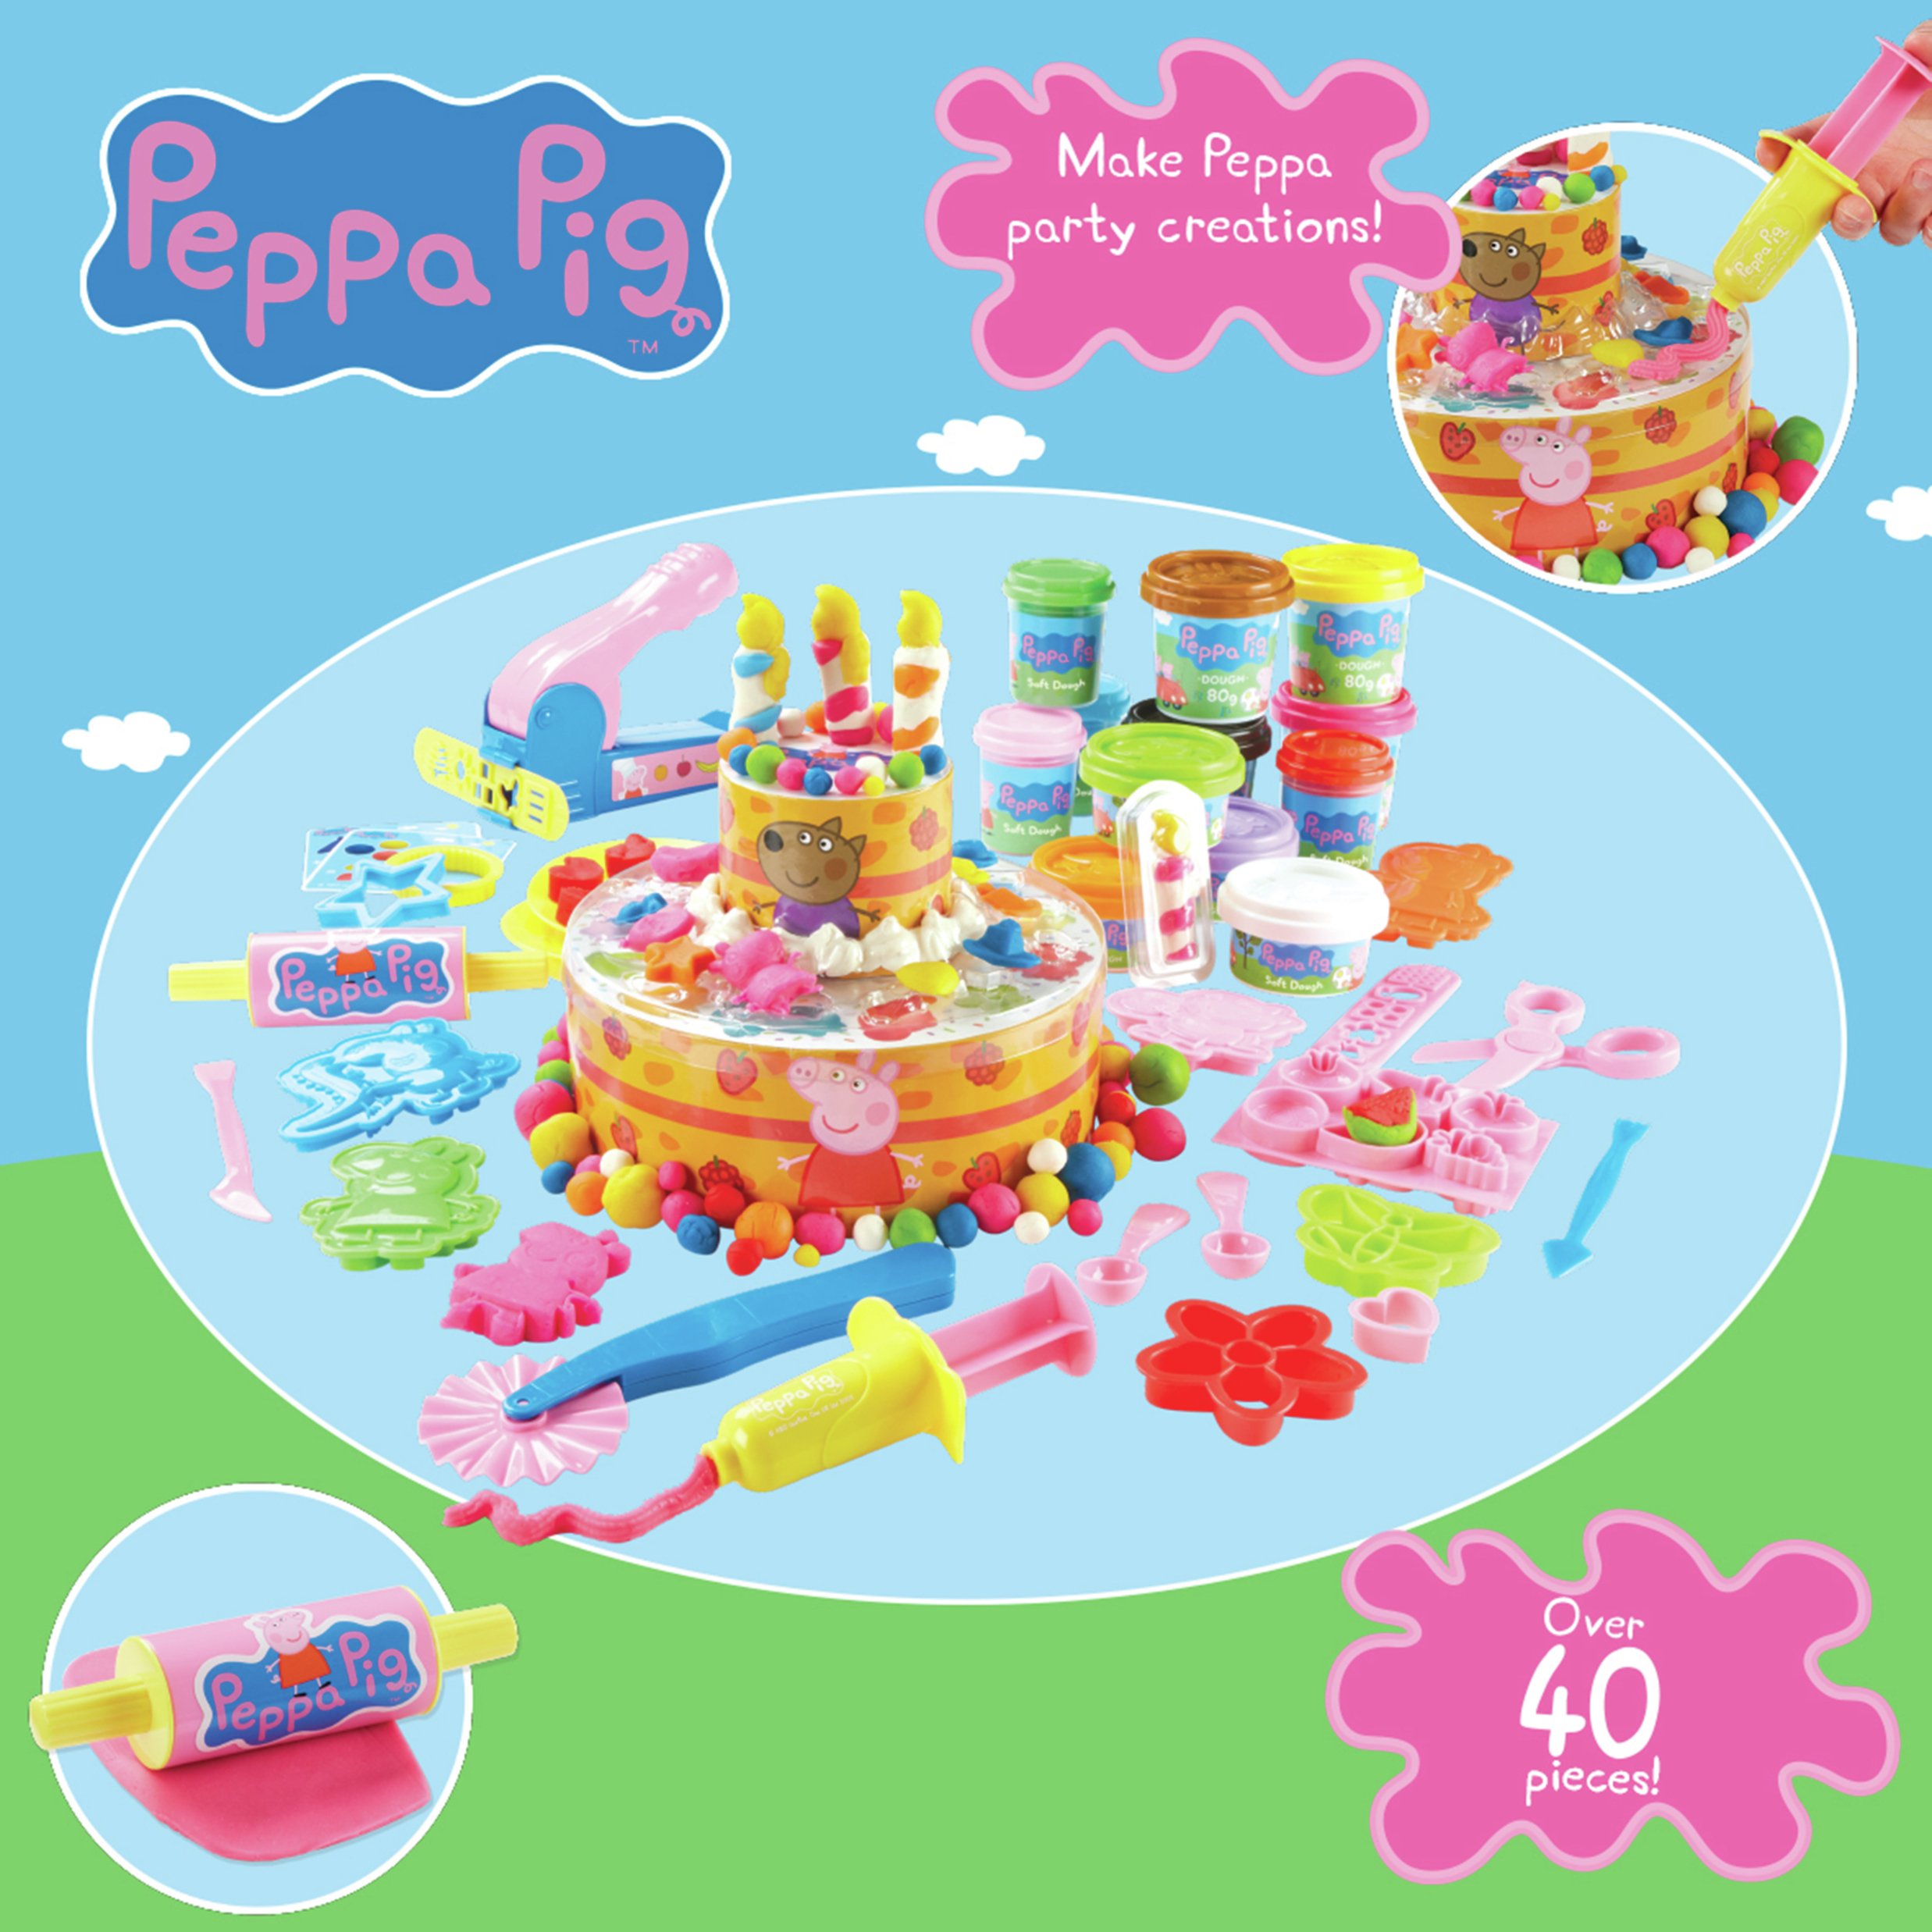 Peppa Pig Great Party Dough Set.